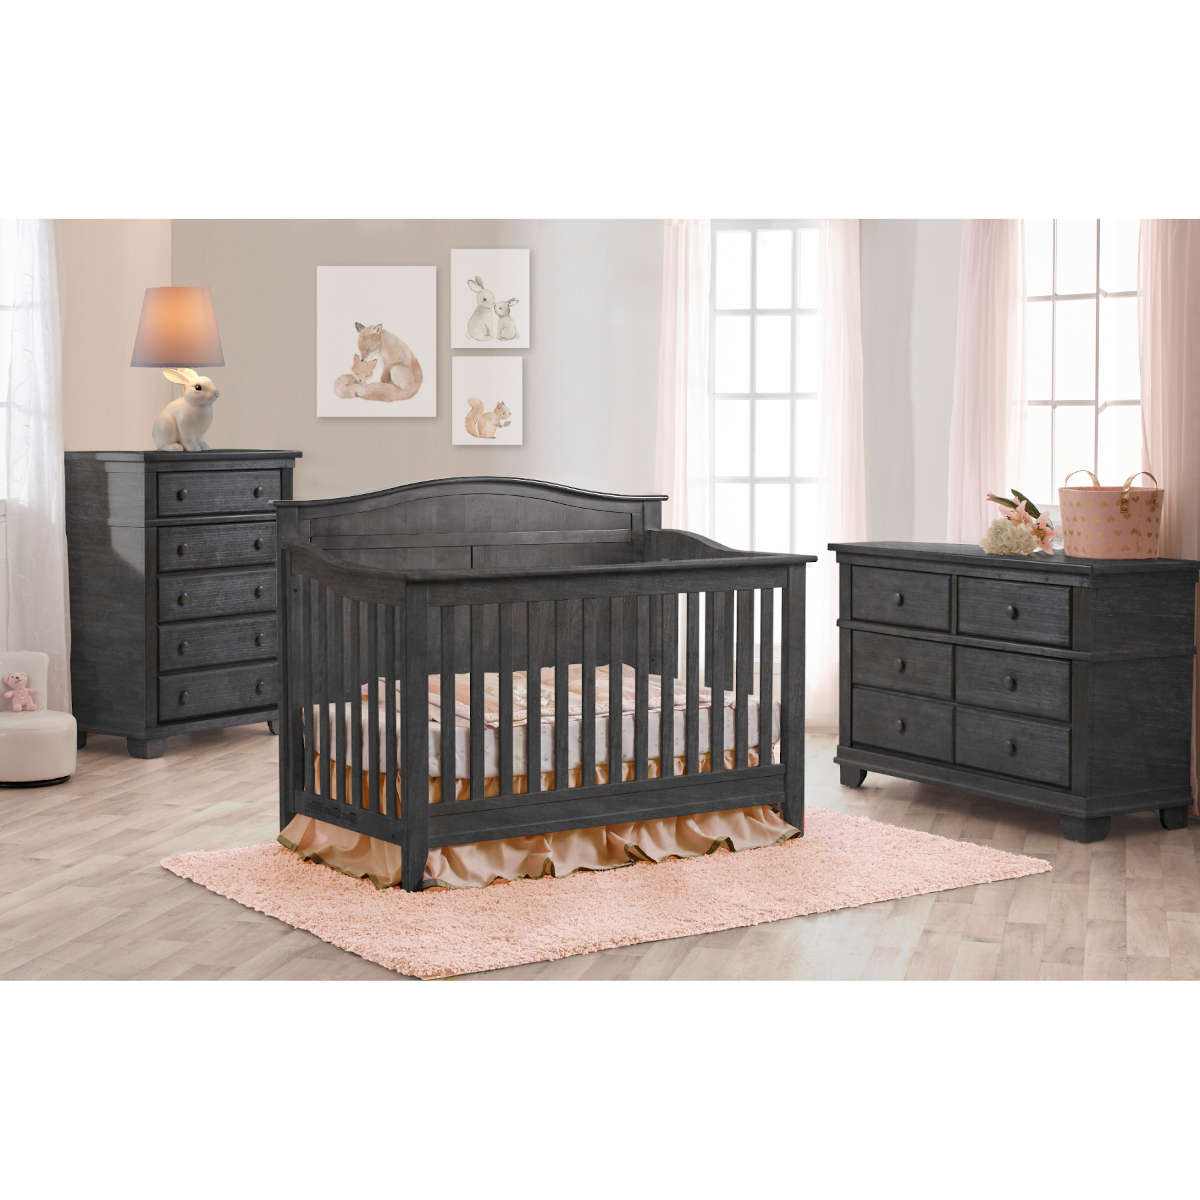 Pali Potenza Forever Arch-Top Crib - Twinkle Twinkle Little One